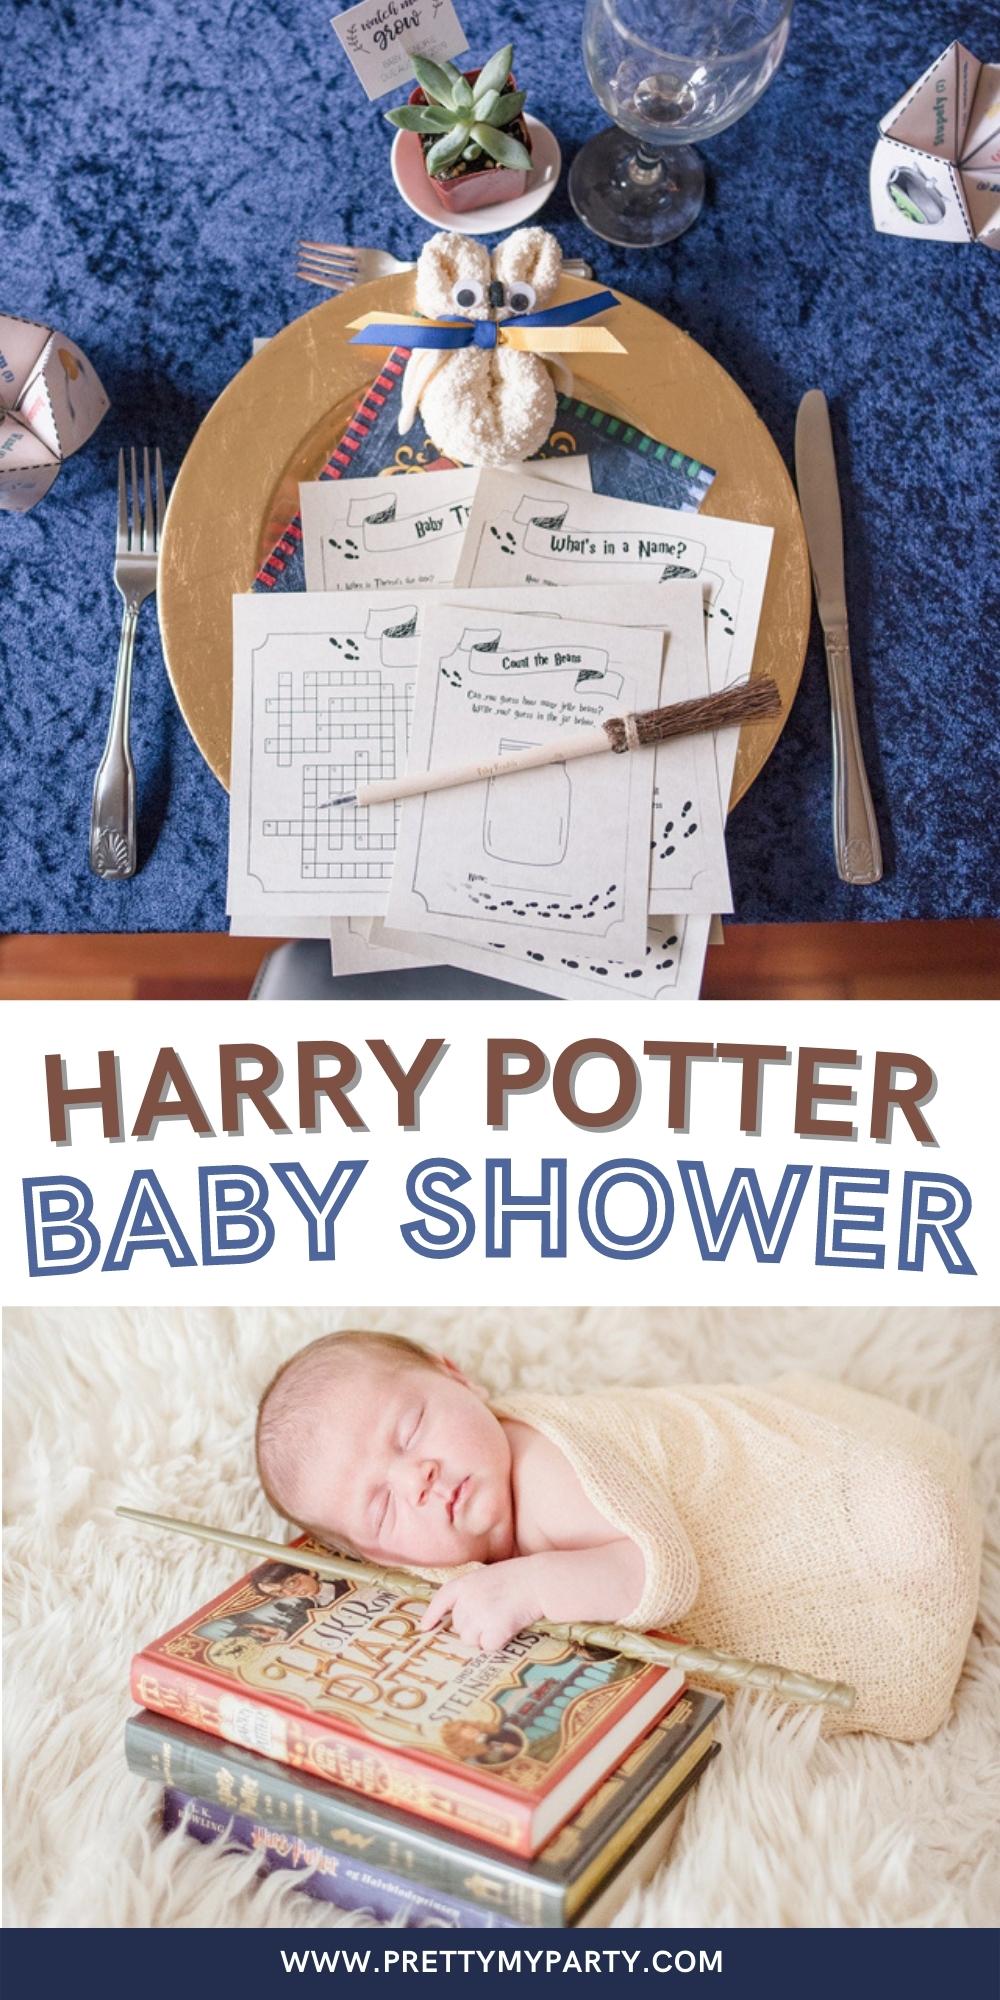 Harry Potter Baby Shower Ideas, Decorations and Favors – Baby